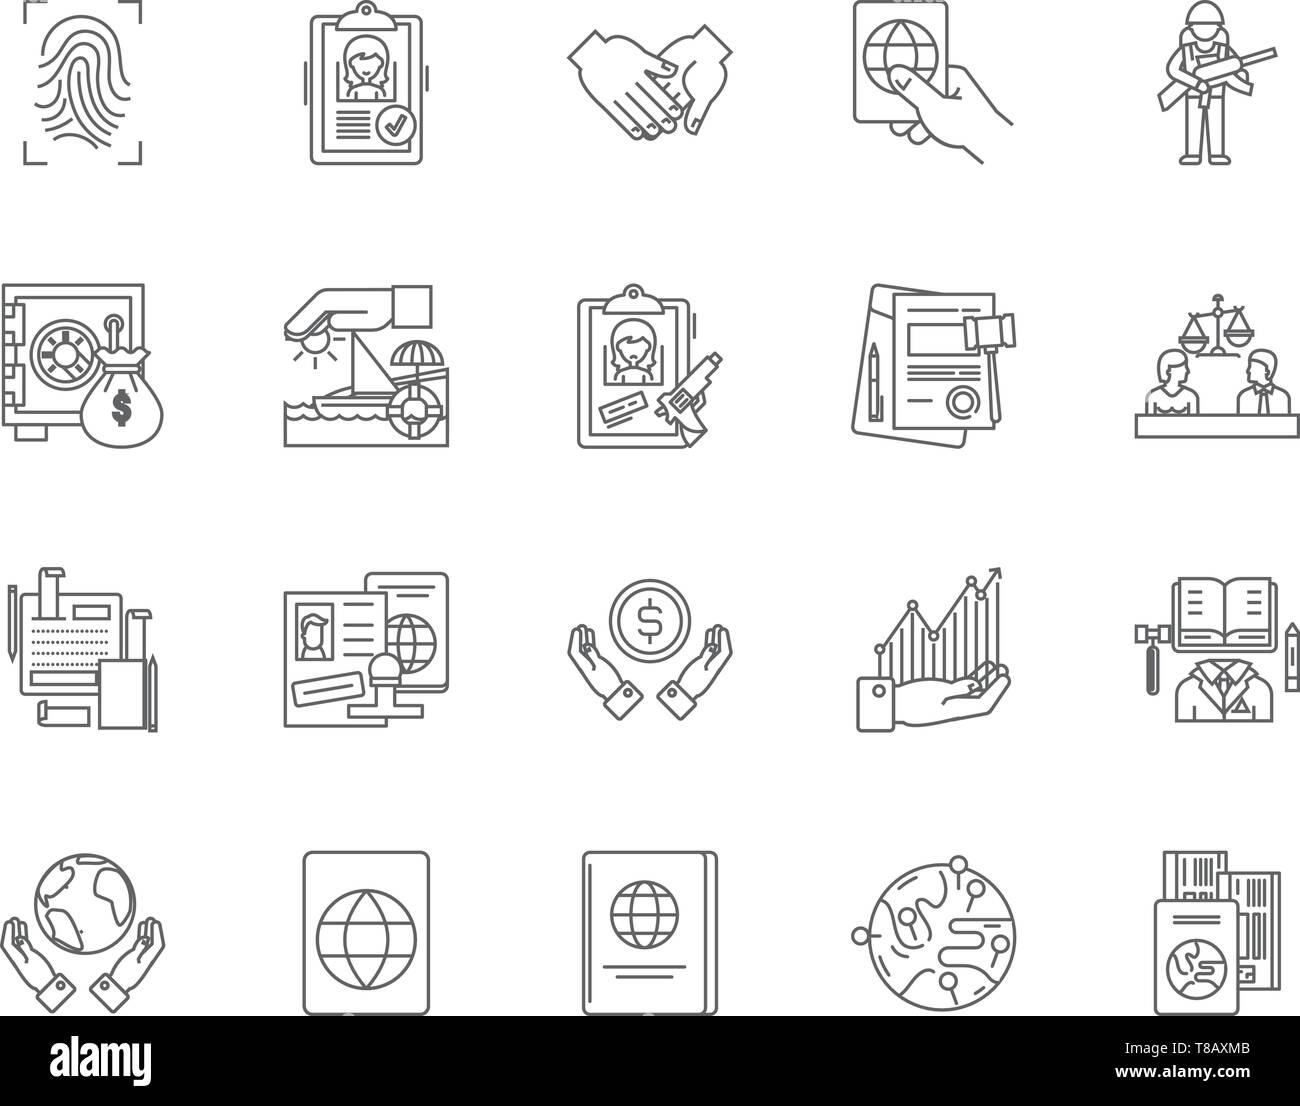 International affairs line icons, signs, vector set, outline illustration concept  Stock Vector